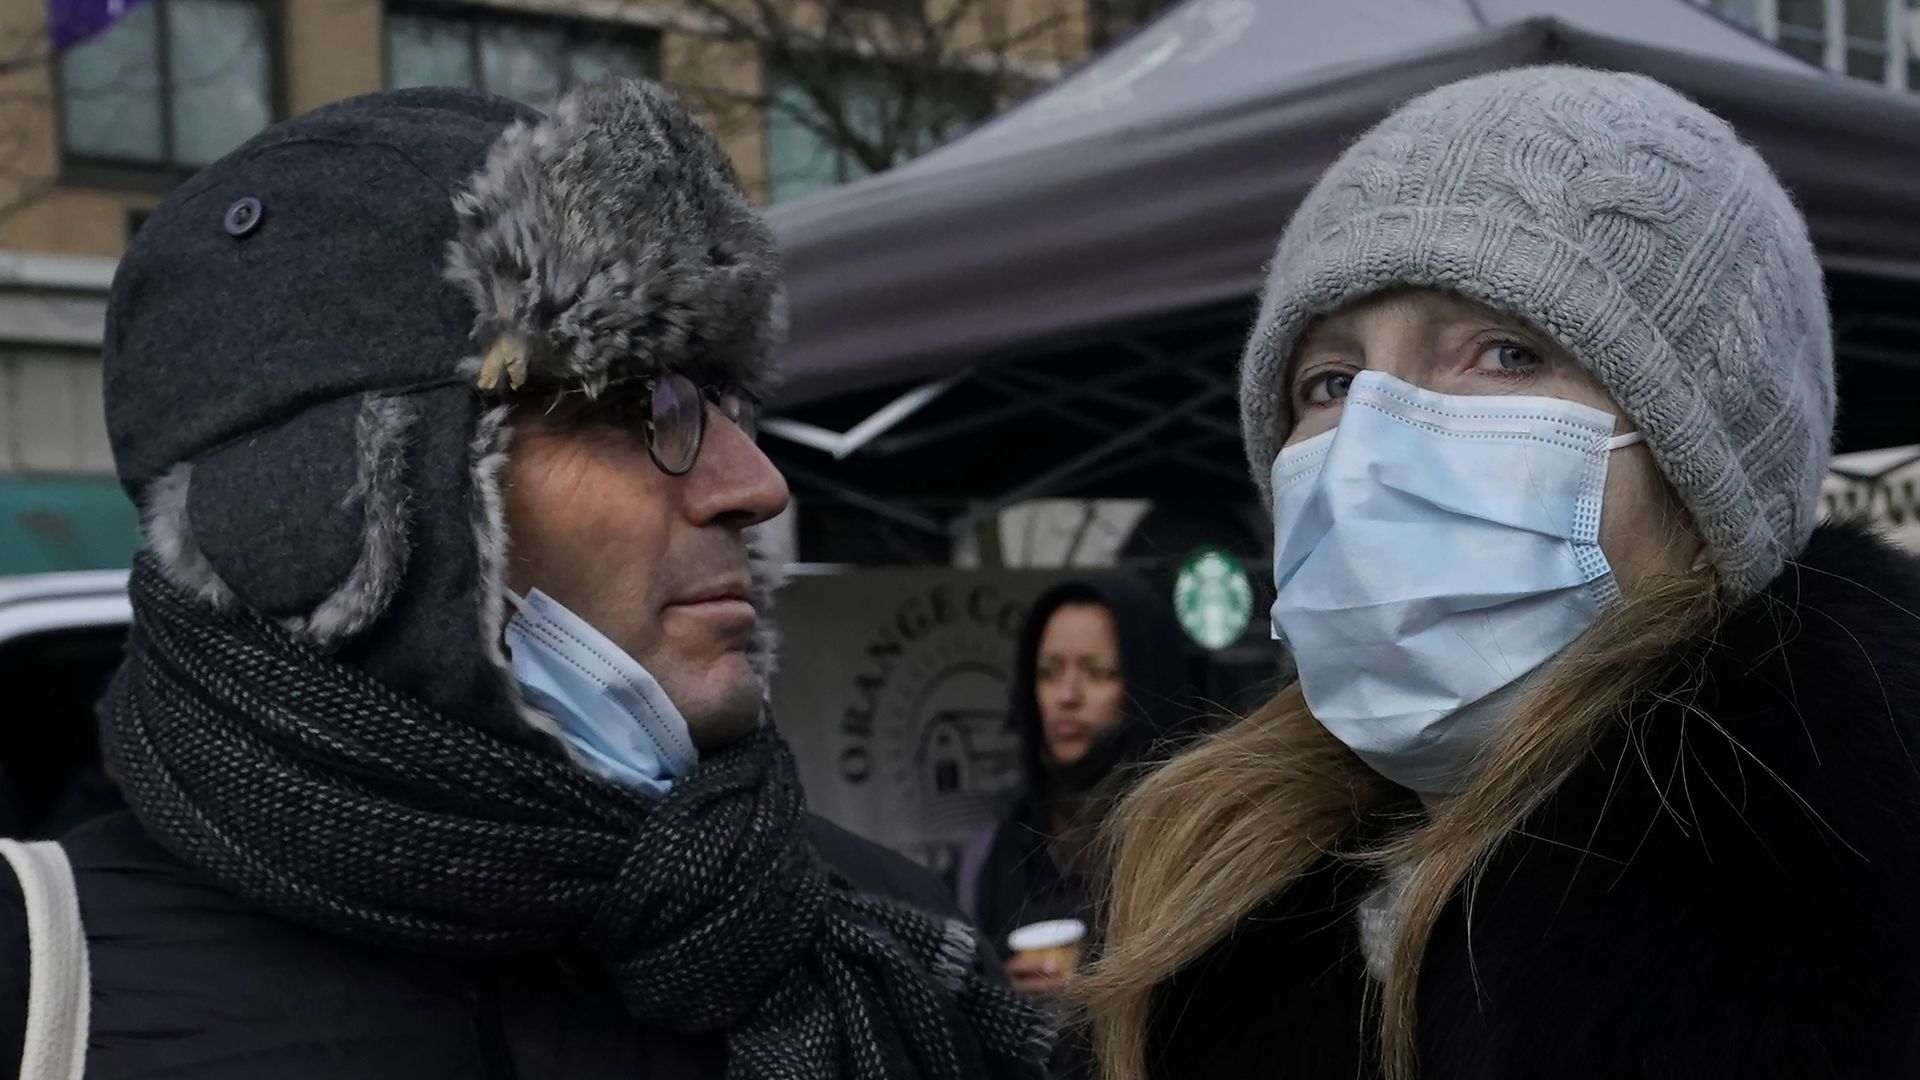 Tourists with face masks walk through Union Square in New York City